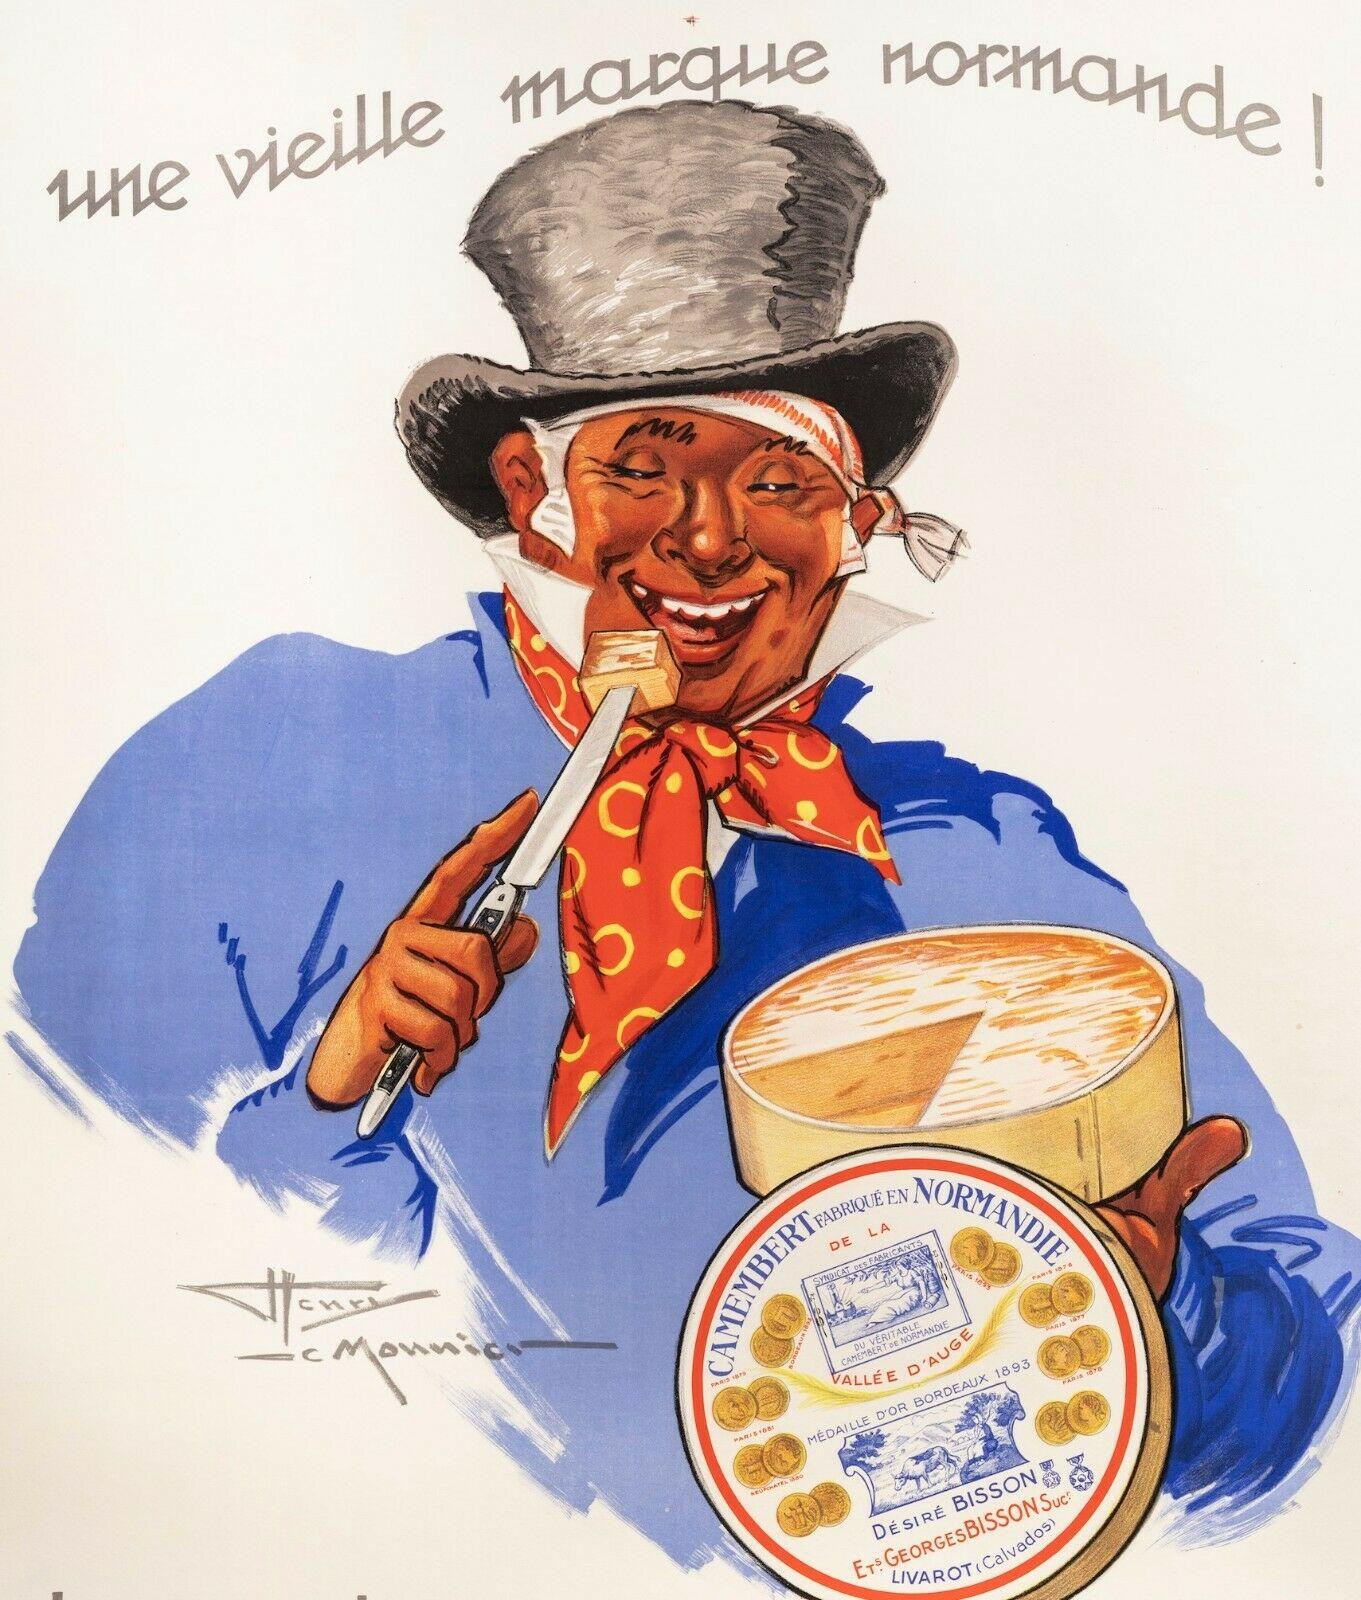 Vintage Poster-Lemonnier-Camembert Brisson Normandy-Wine with Cheese, 1937

Poster to promote the Camembert produced by Georges Bisson in Livarot, commune of Clavados (Normandy). A man, top hat, red scarf, blue clothing, cuts a slice of camembert